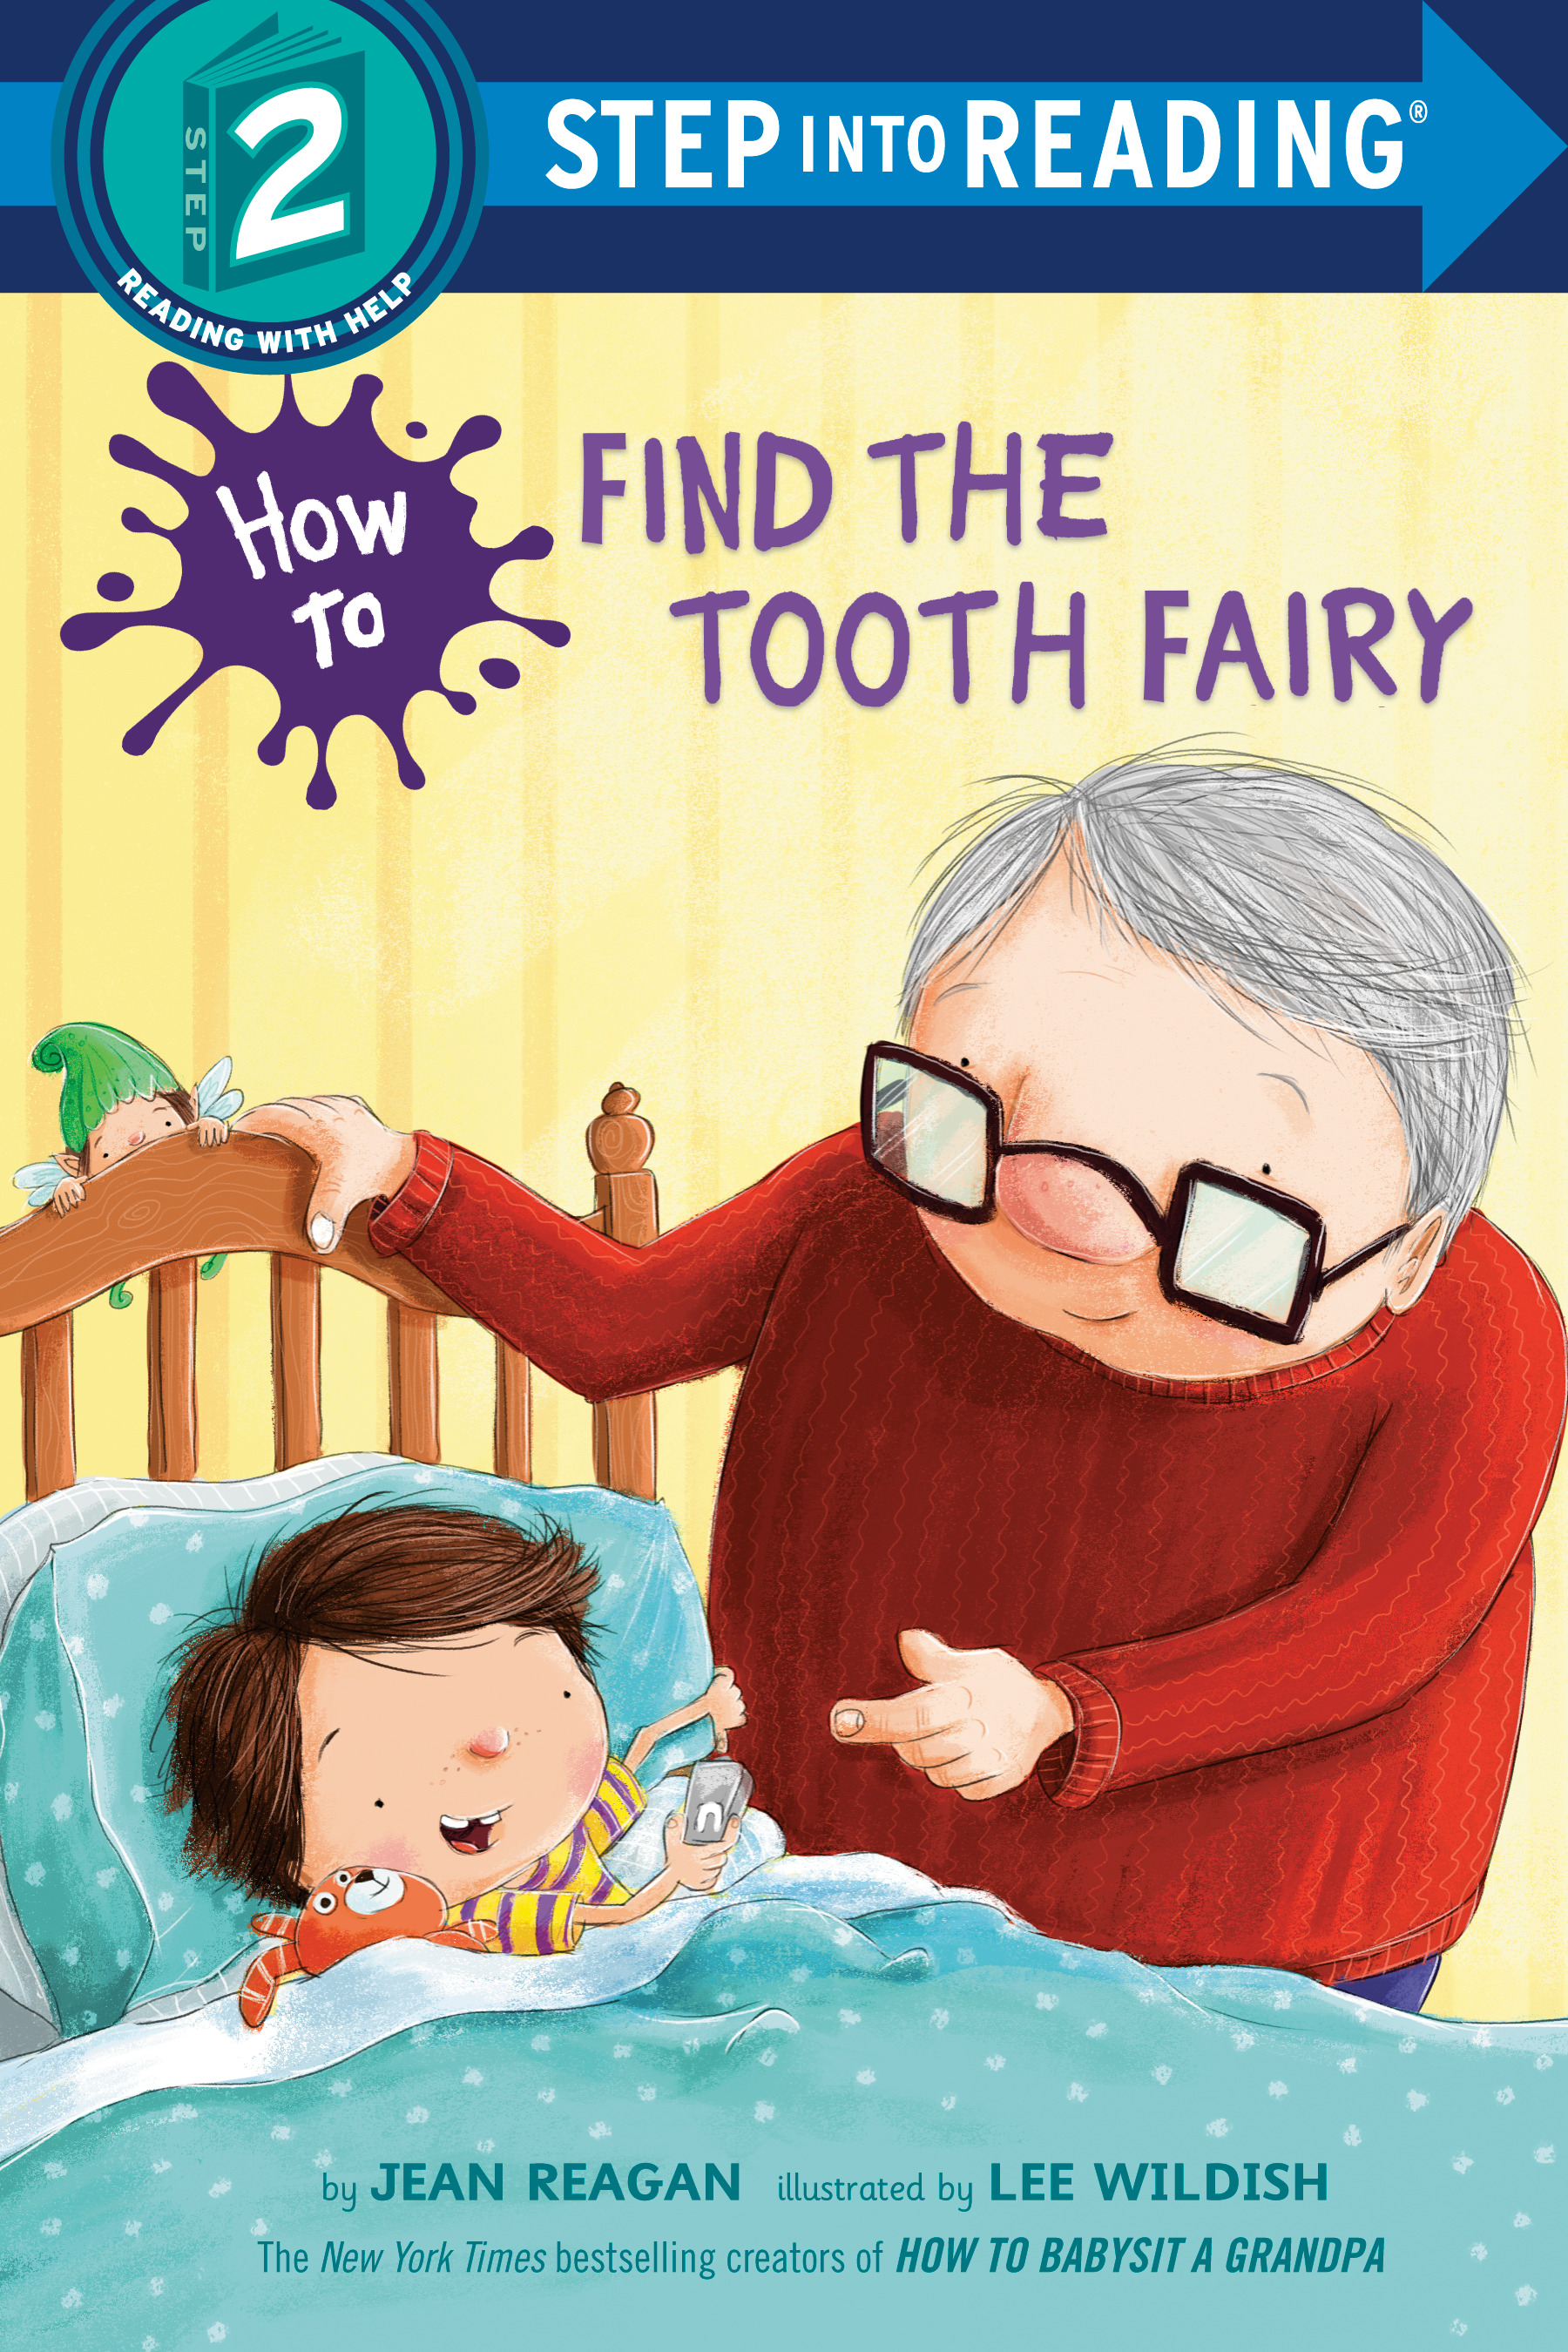 How to Find the Tooth Fairy | First reader